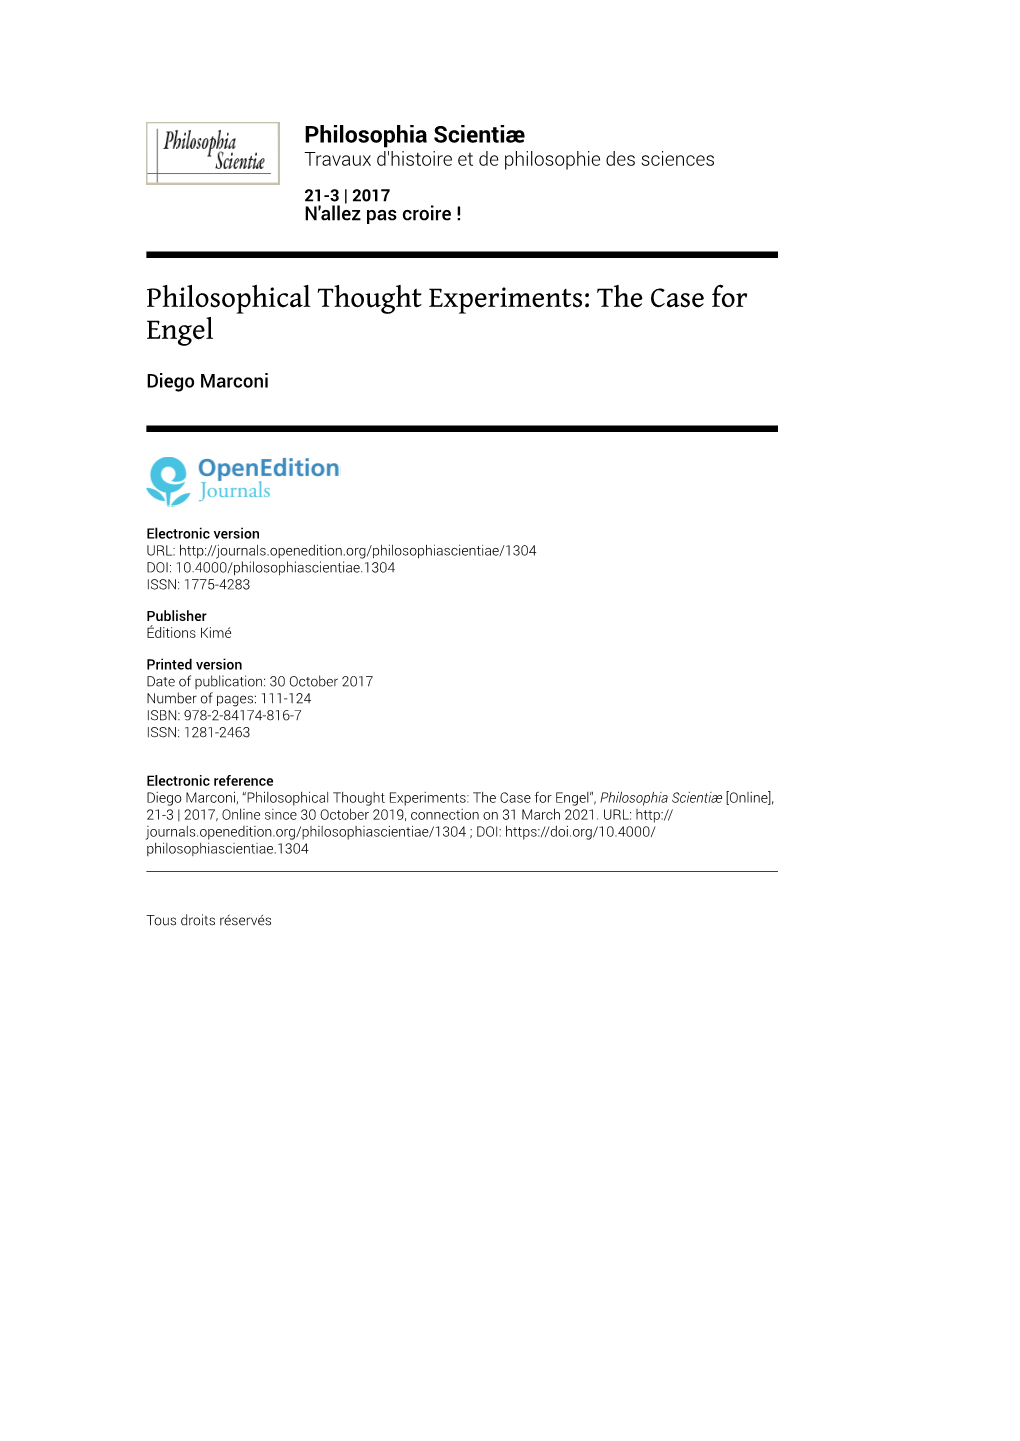 Philosophical Thought Experiments: the Case for Engel